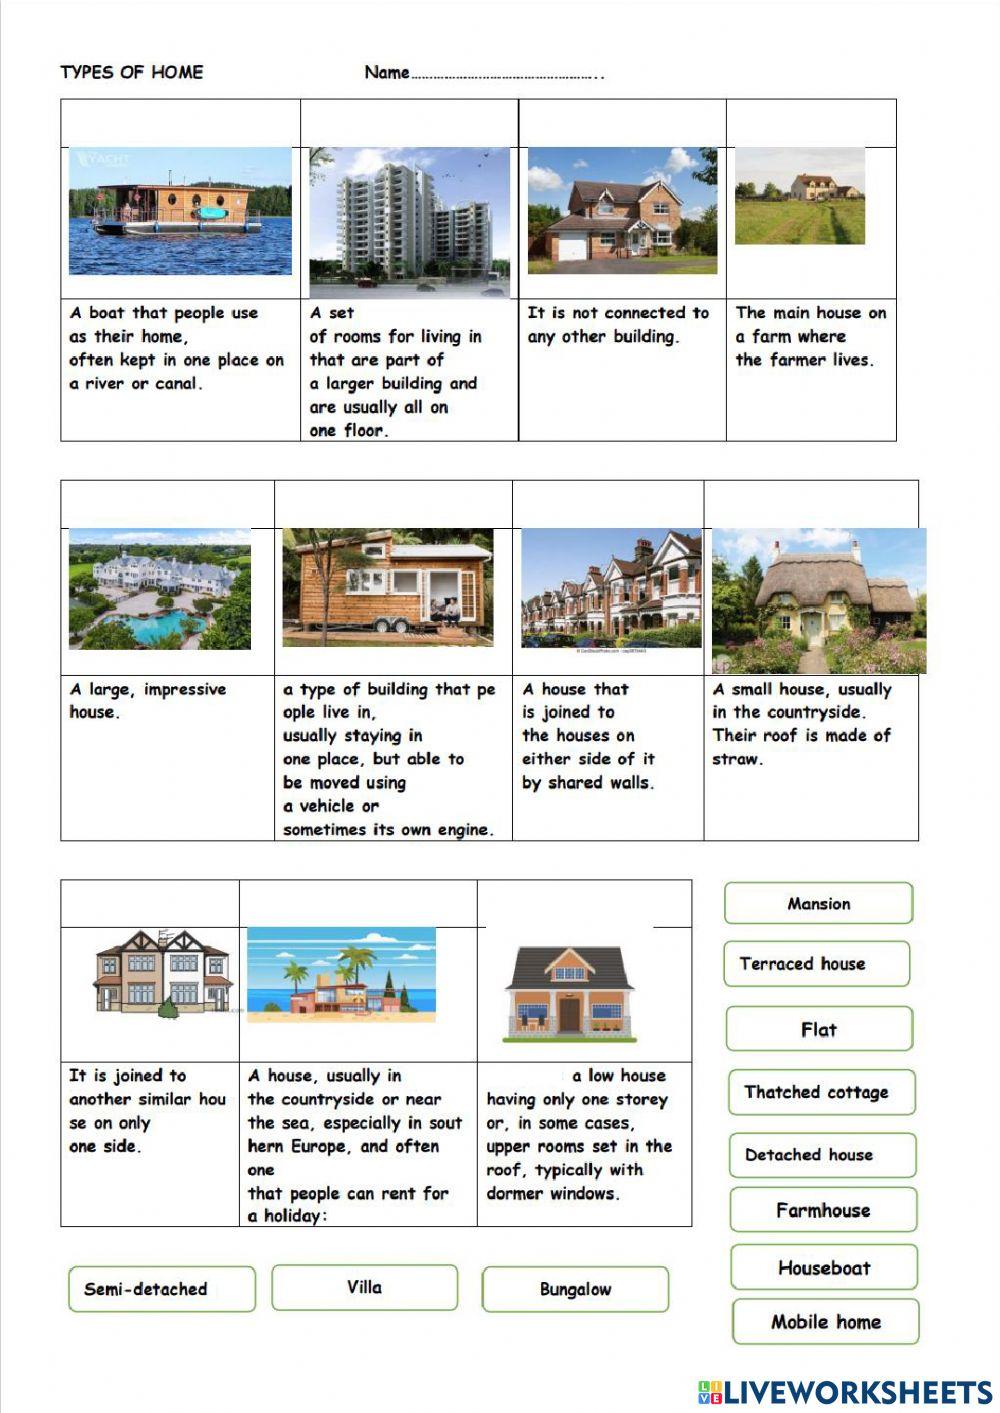 Types of houses